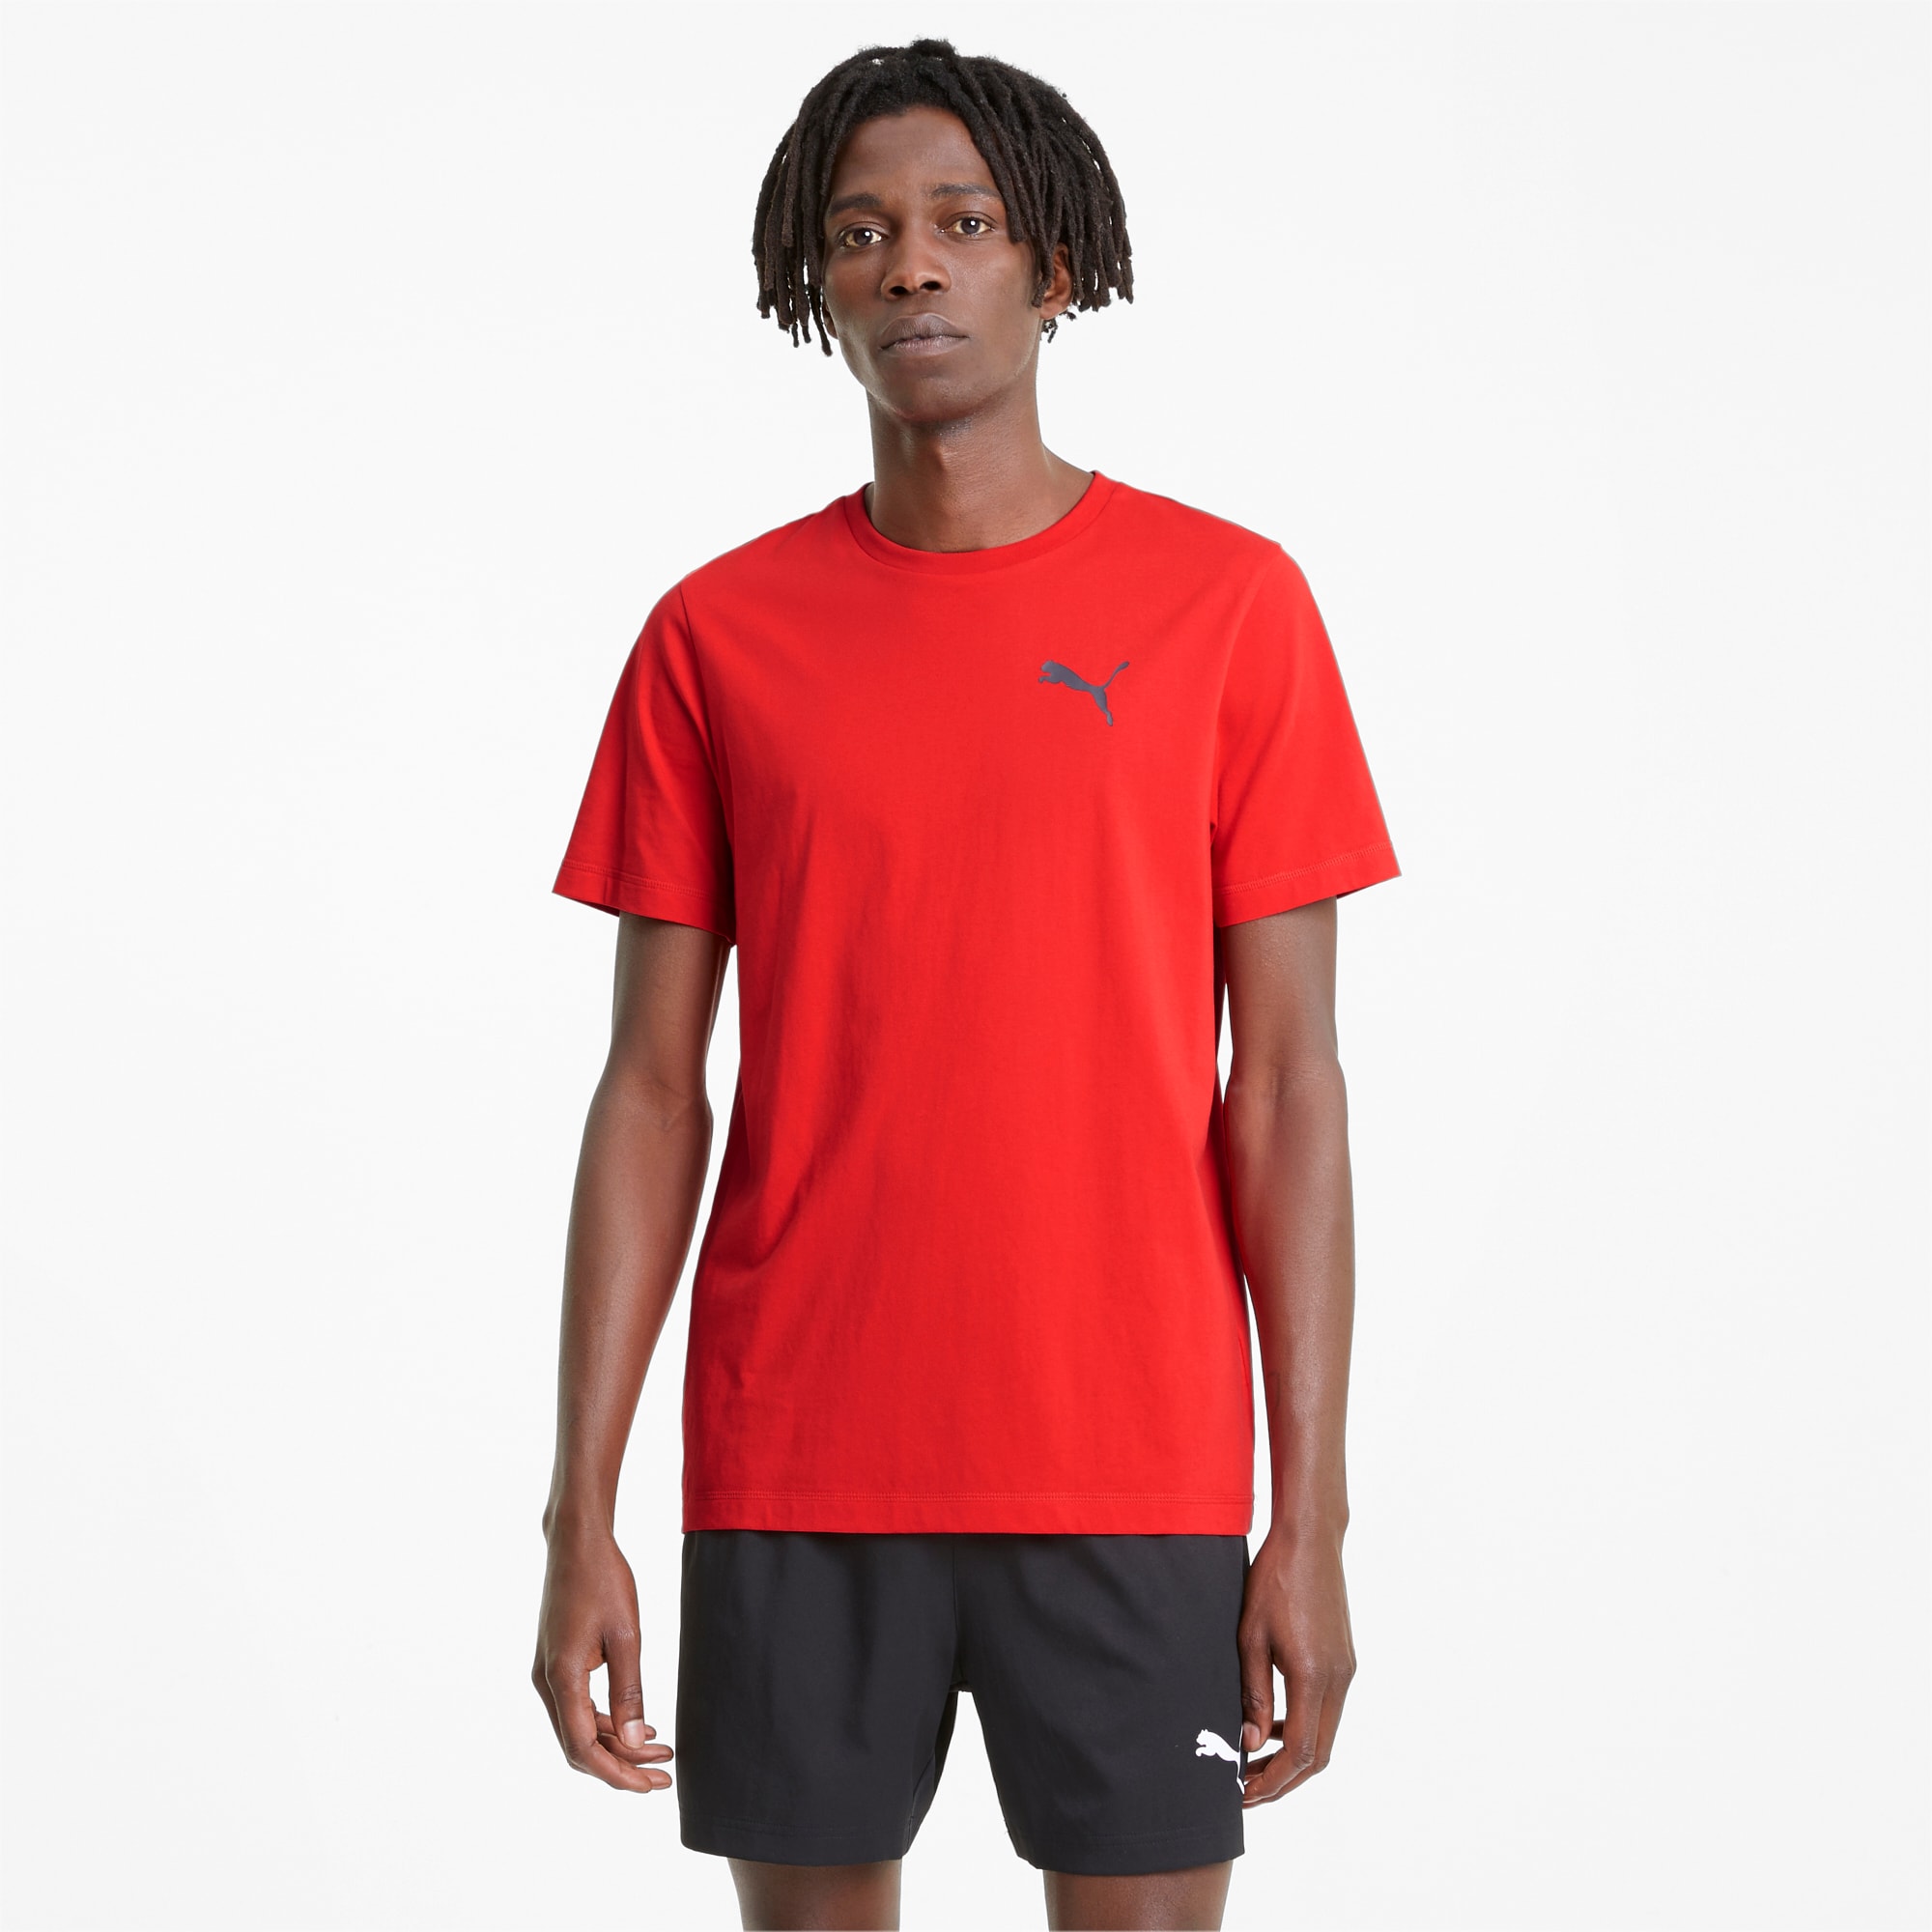 PUMA Active Soft Men's T-Shirt, High Risk Red, Size L, Clothing